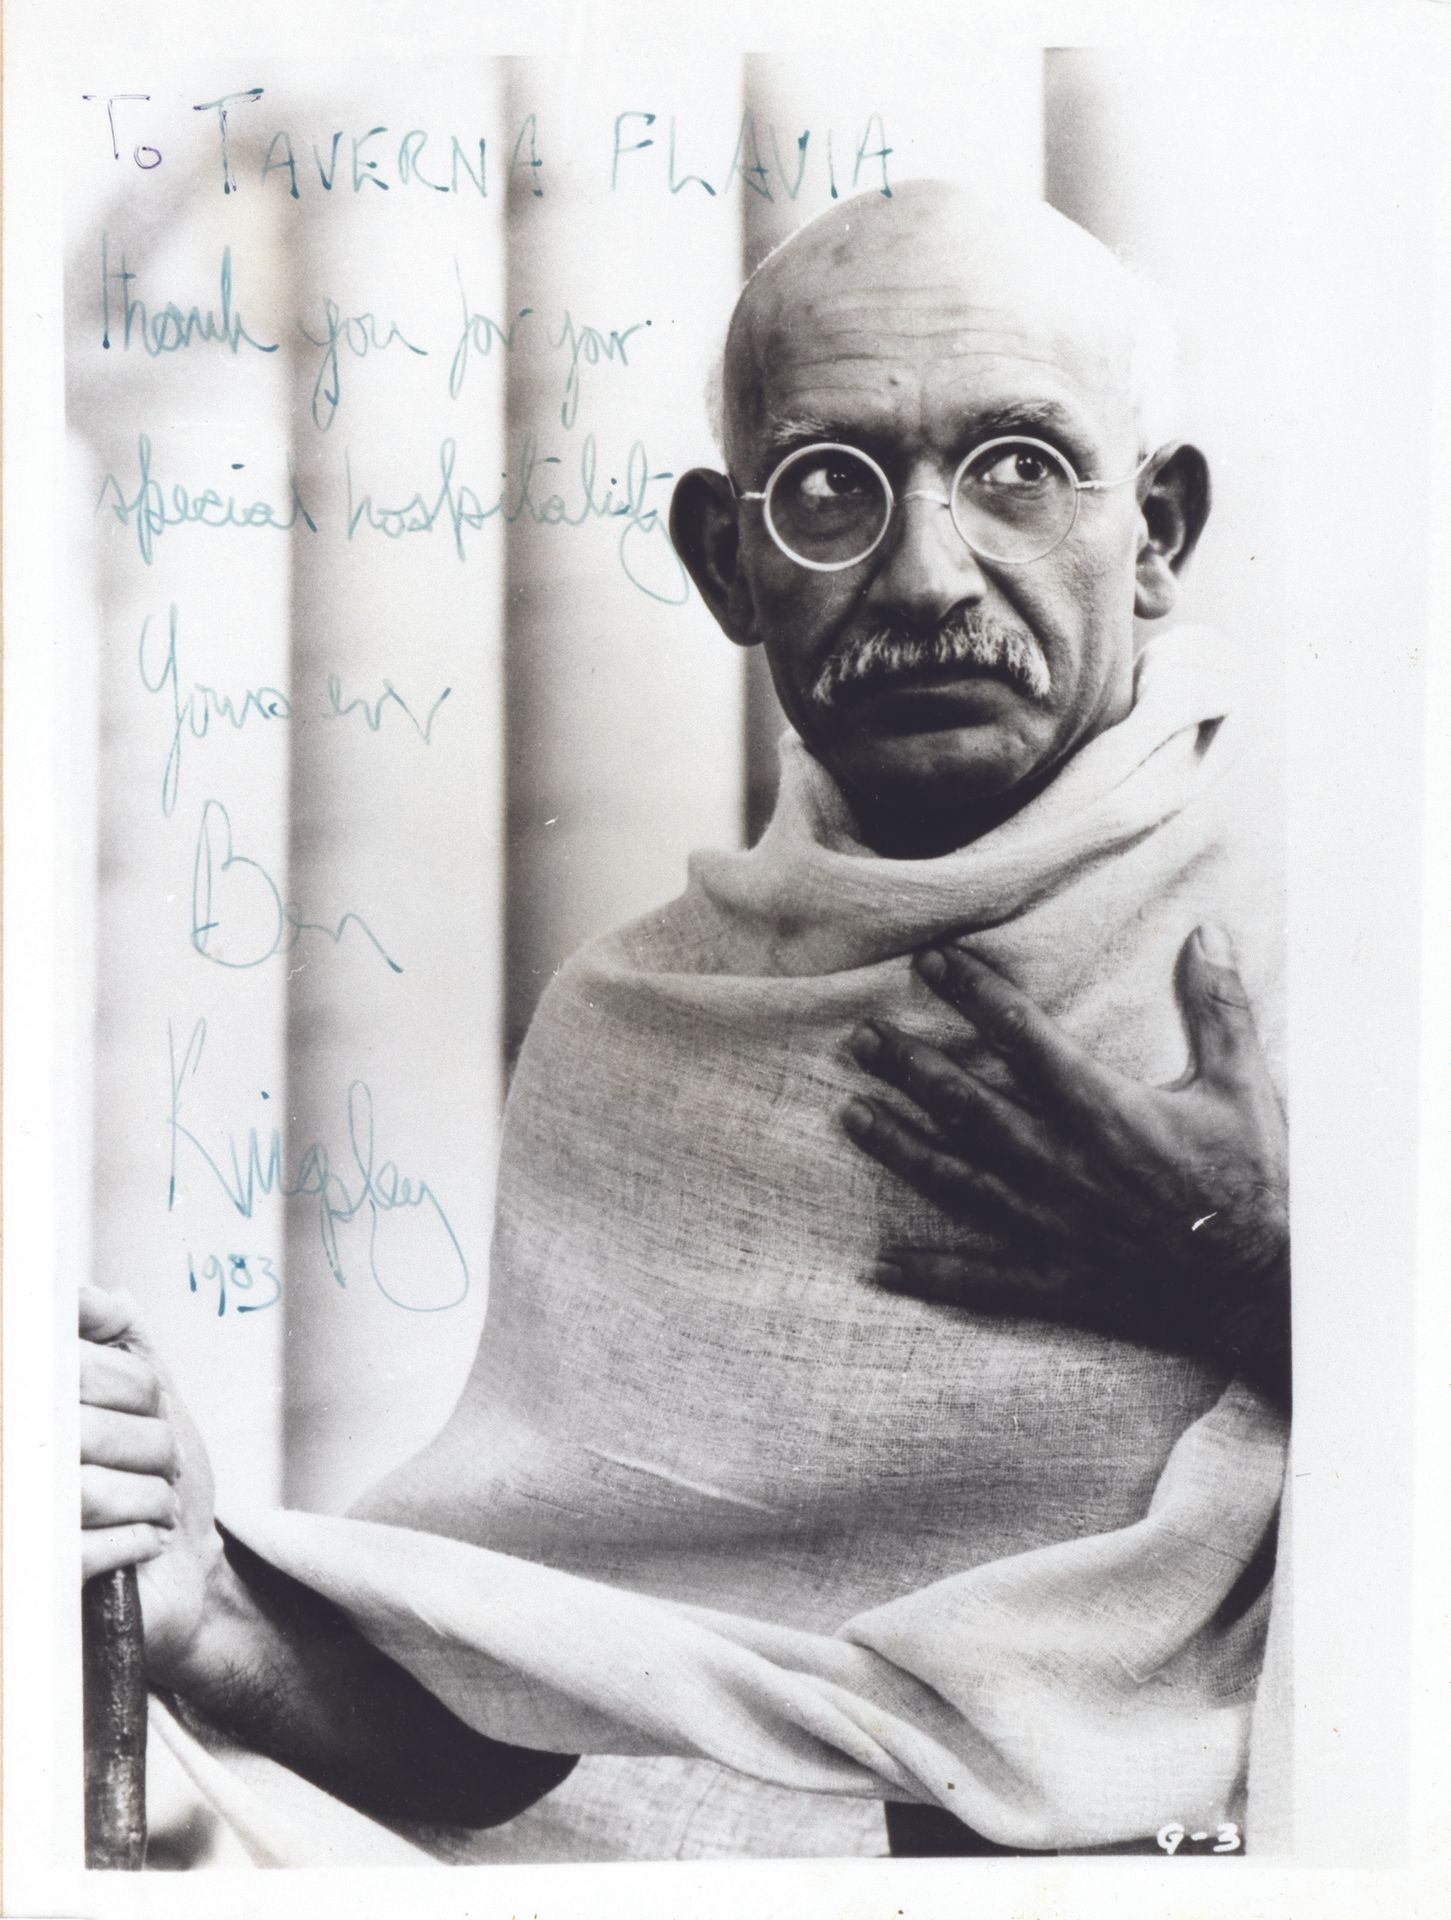 Ben Kingsley Snainton 1943: Photograph with dedication and signature Widmung und&hellip;